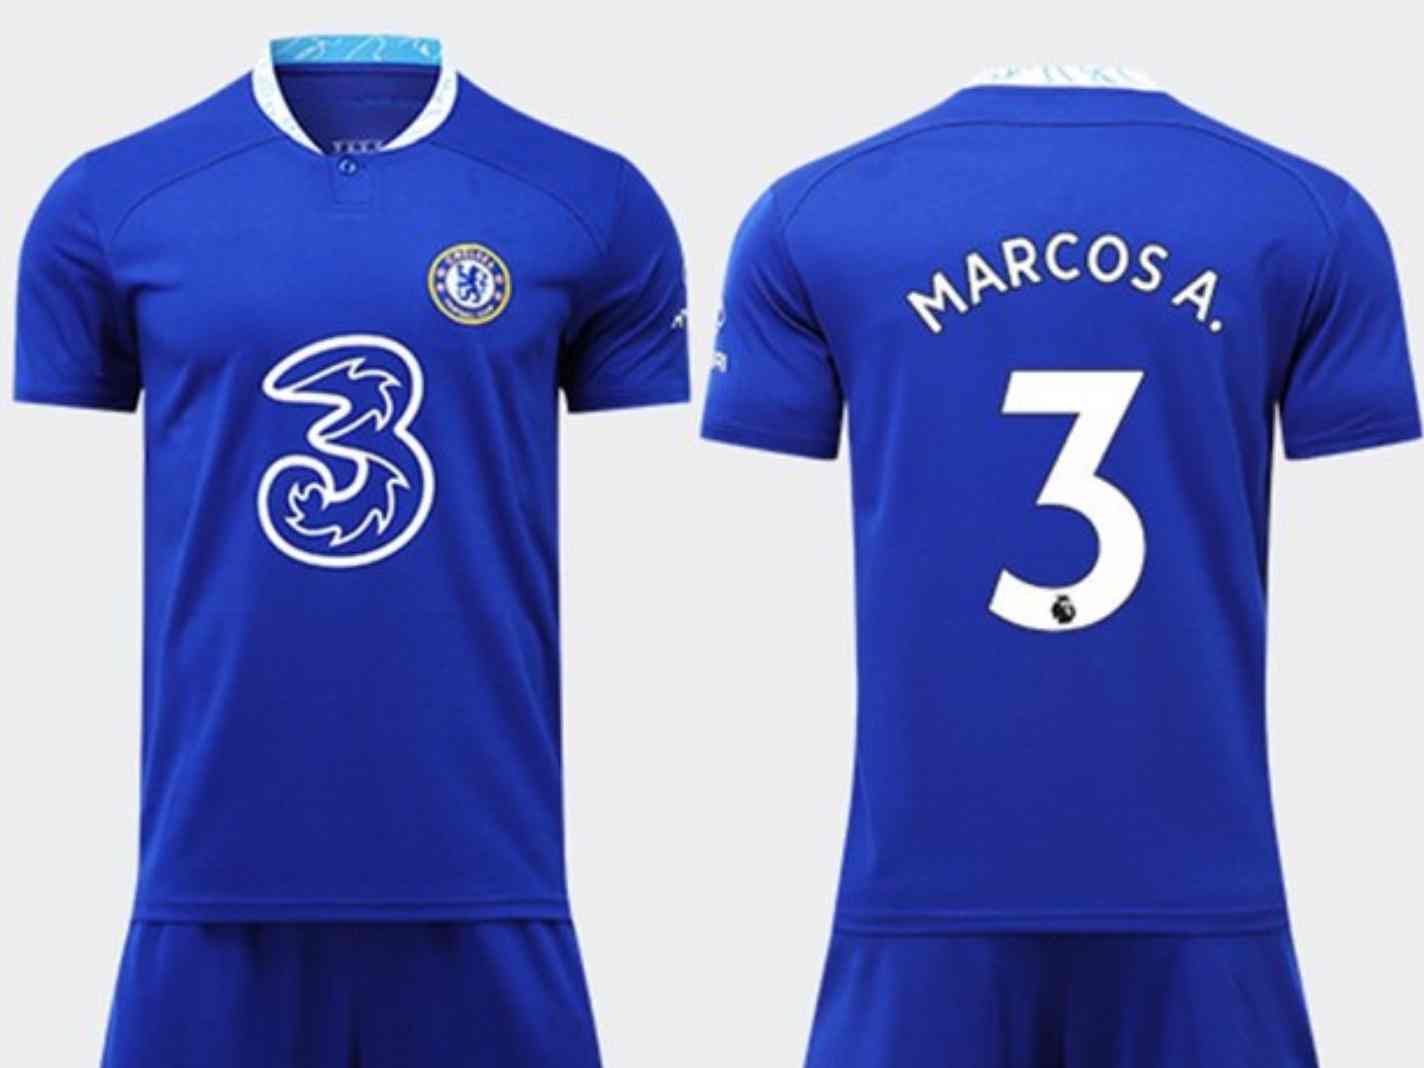 Chelsea home kit for 22/23 season spotted being sold on Walmart